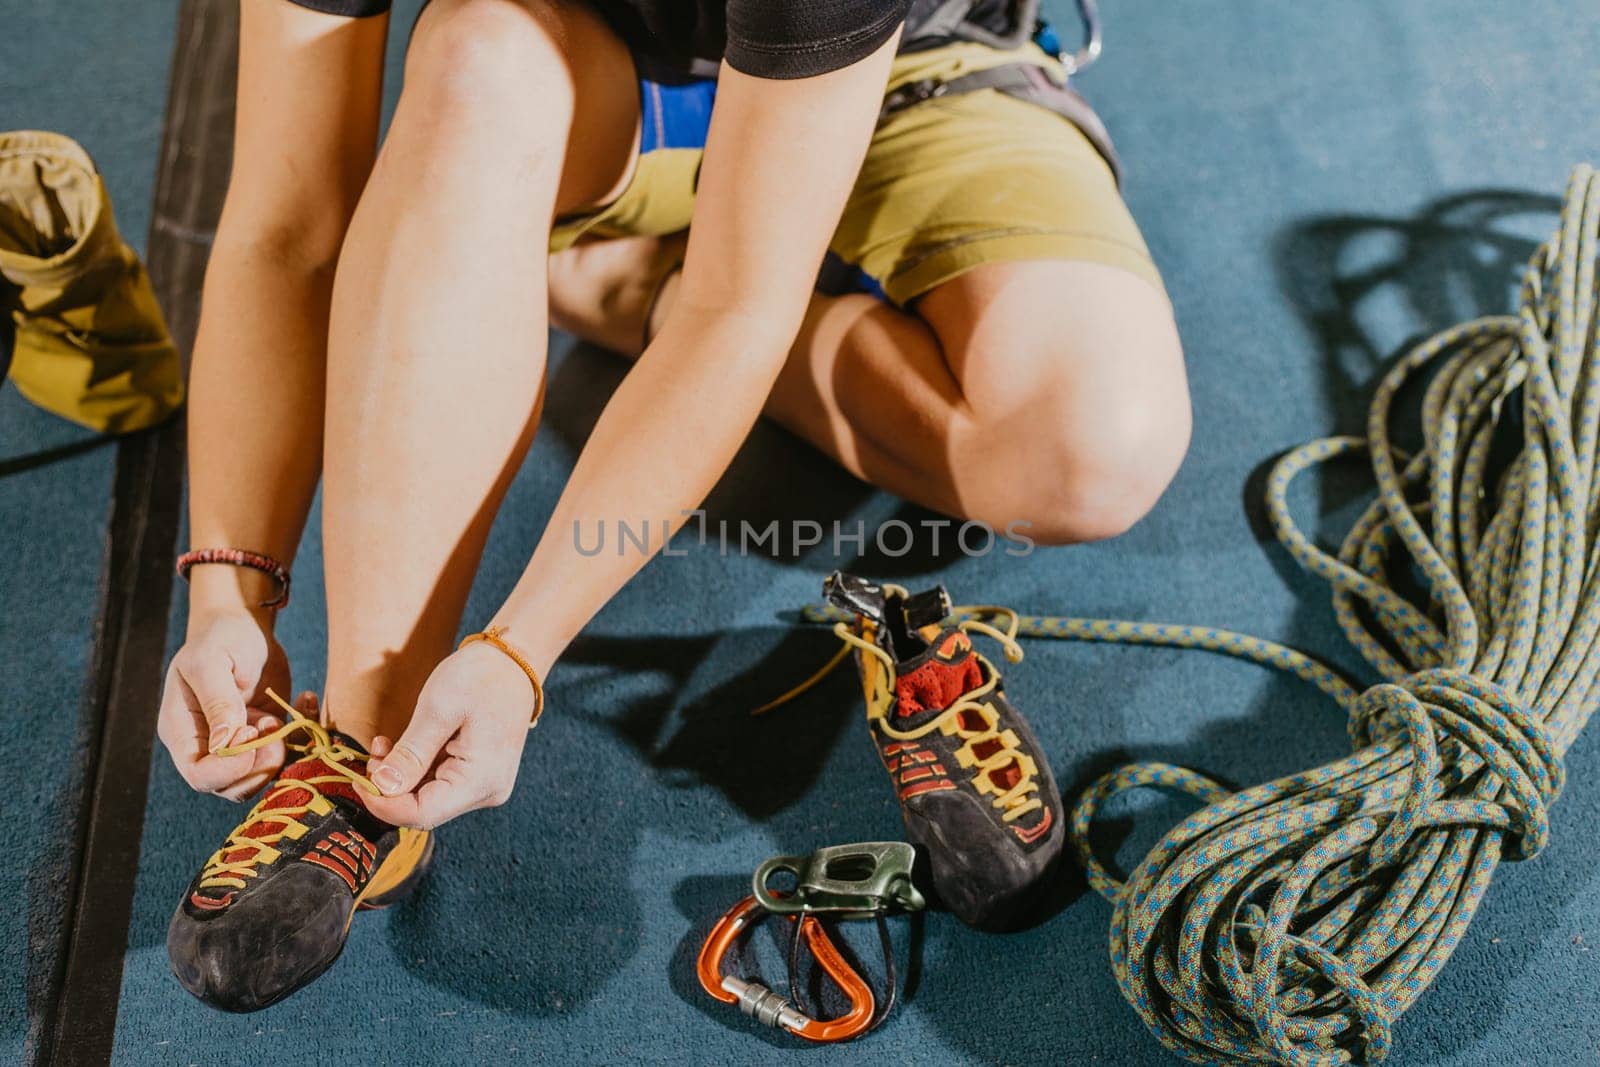 Young woman climber prepare before to climbing on a boulder wall indoor with equipment, shoe, rope, carabiner, concept of extreme sports and bouldering